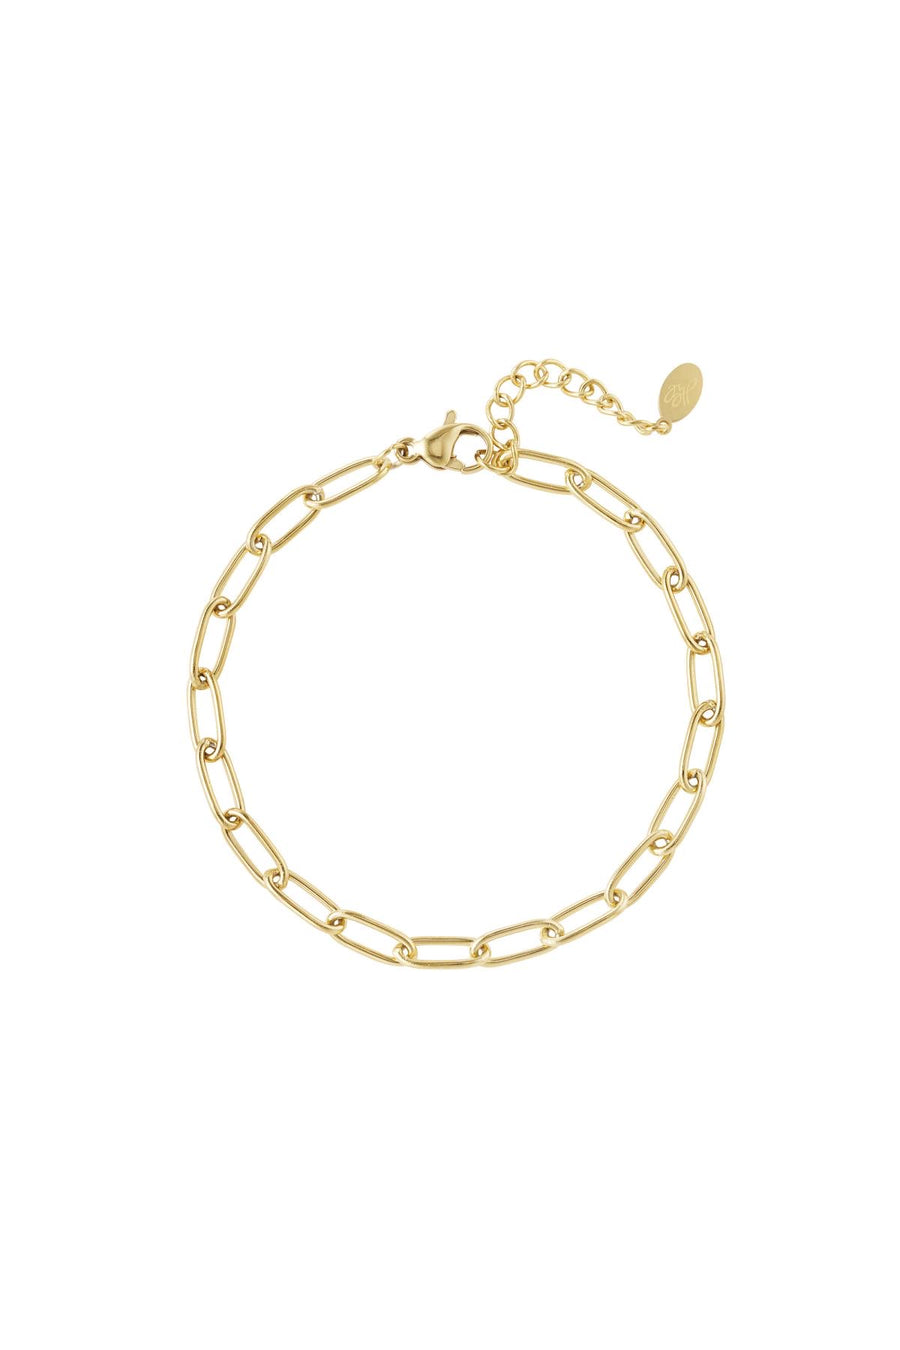 Paperchain Link Bracelet Gold & Silver Available